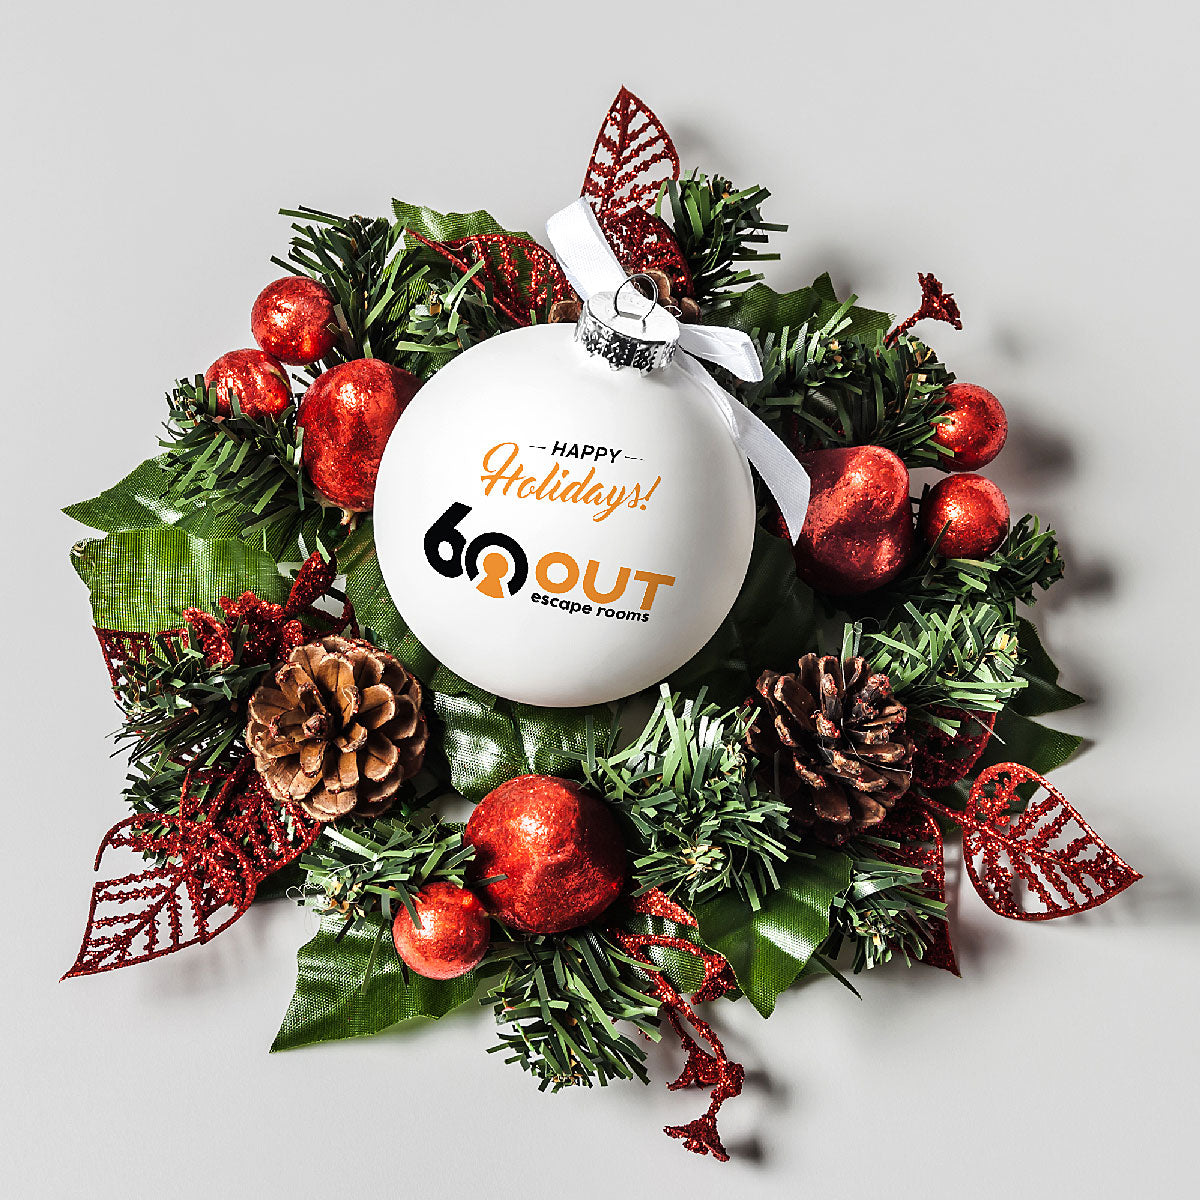 Limited Edition | 60out Christmas Ornament